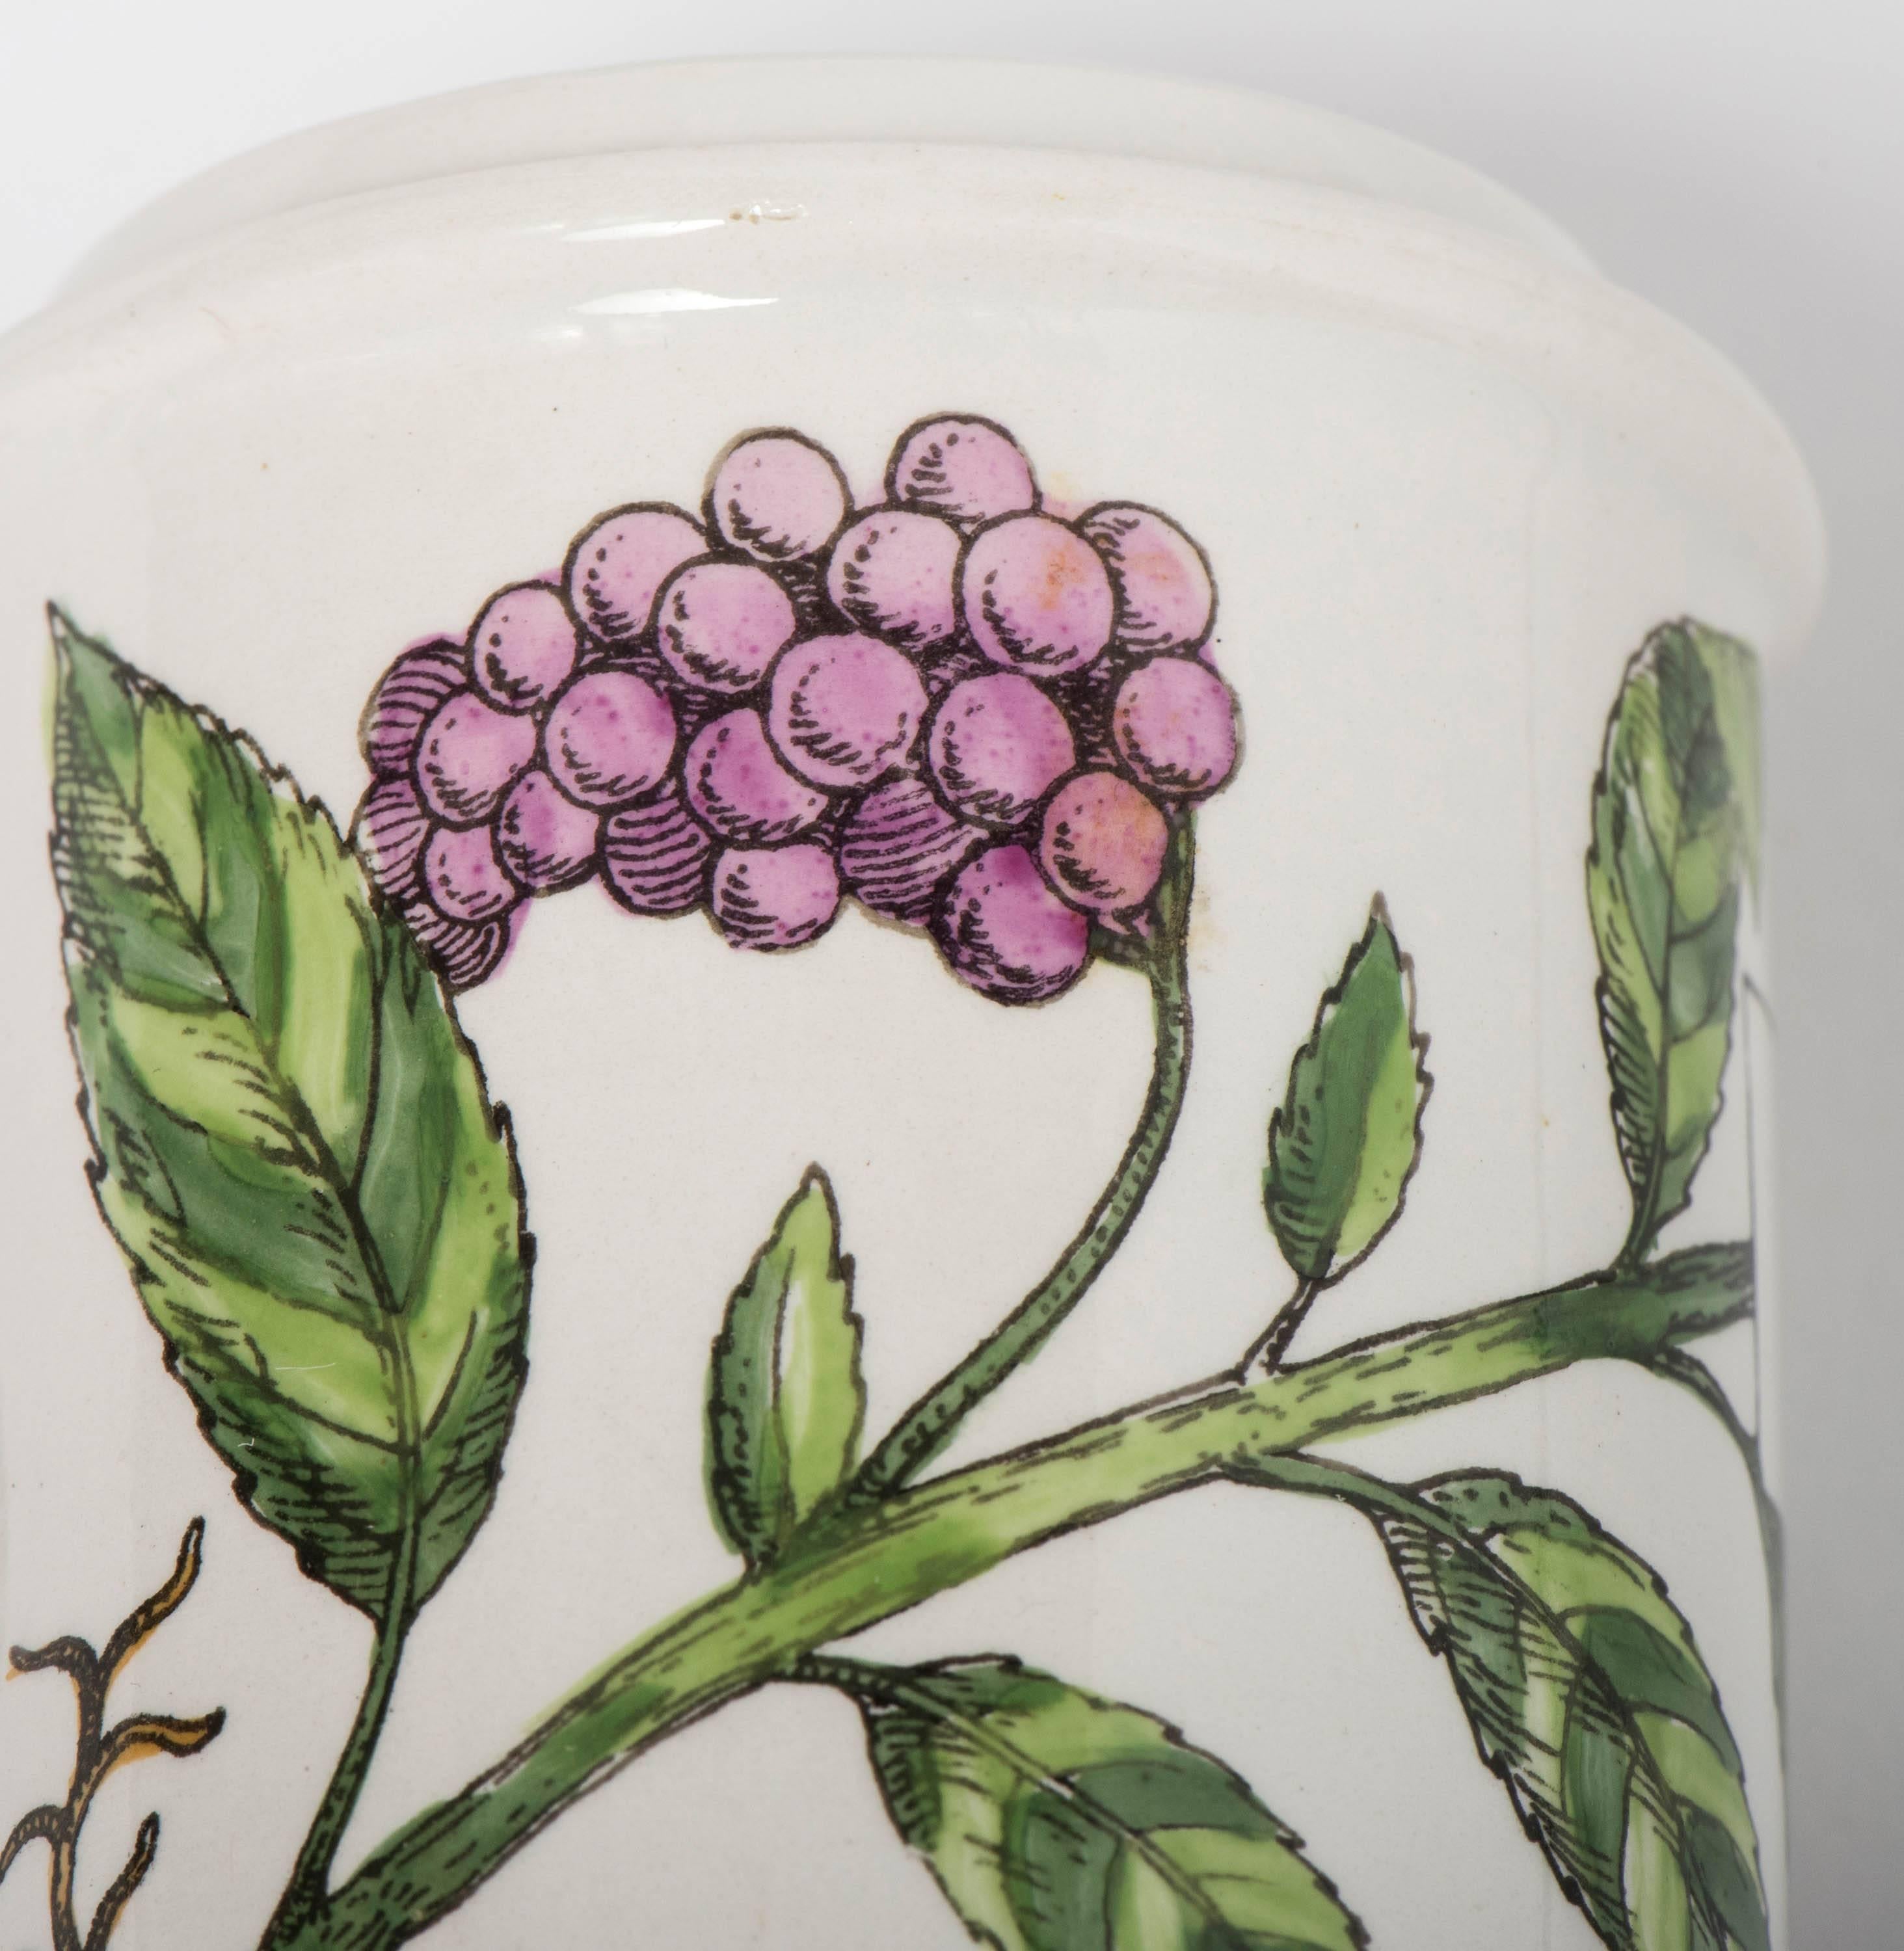 Piero Fornasetti porcelain pepper jar with cover, Italy circa 1960 In Excellent Condition For Sale In Macclesfield, Cheshire